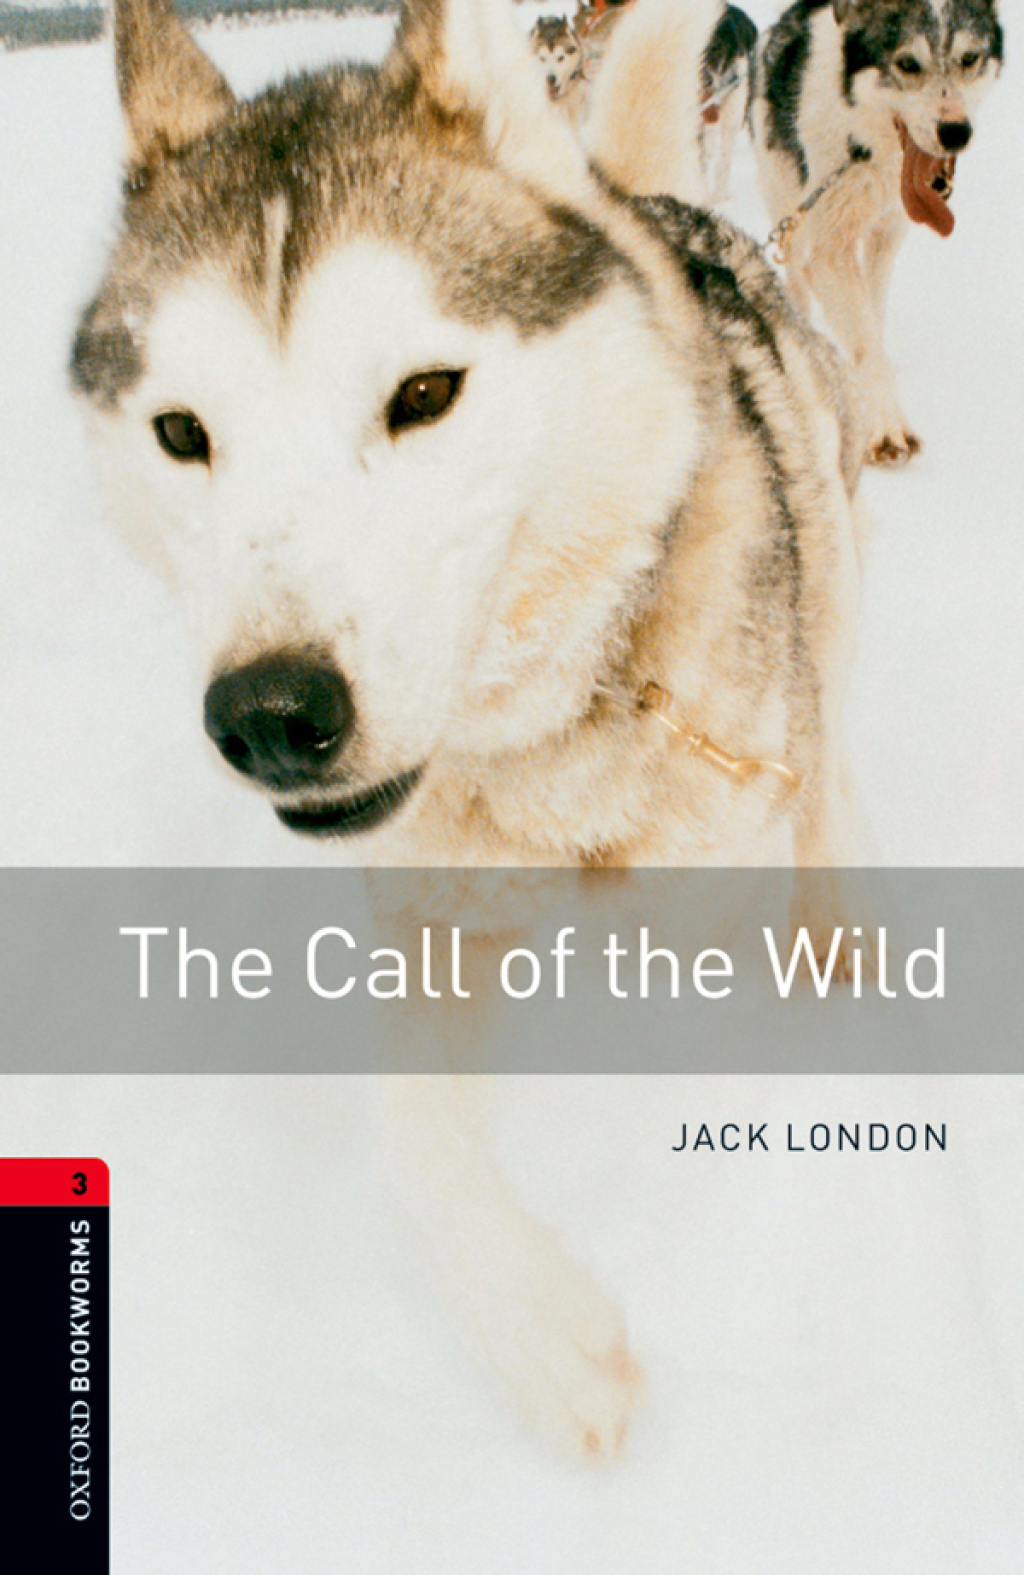 The Call of the Wild Level 3 Oxford Bookworms Library - 3rd Edition (eBook Rental)